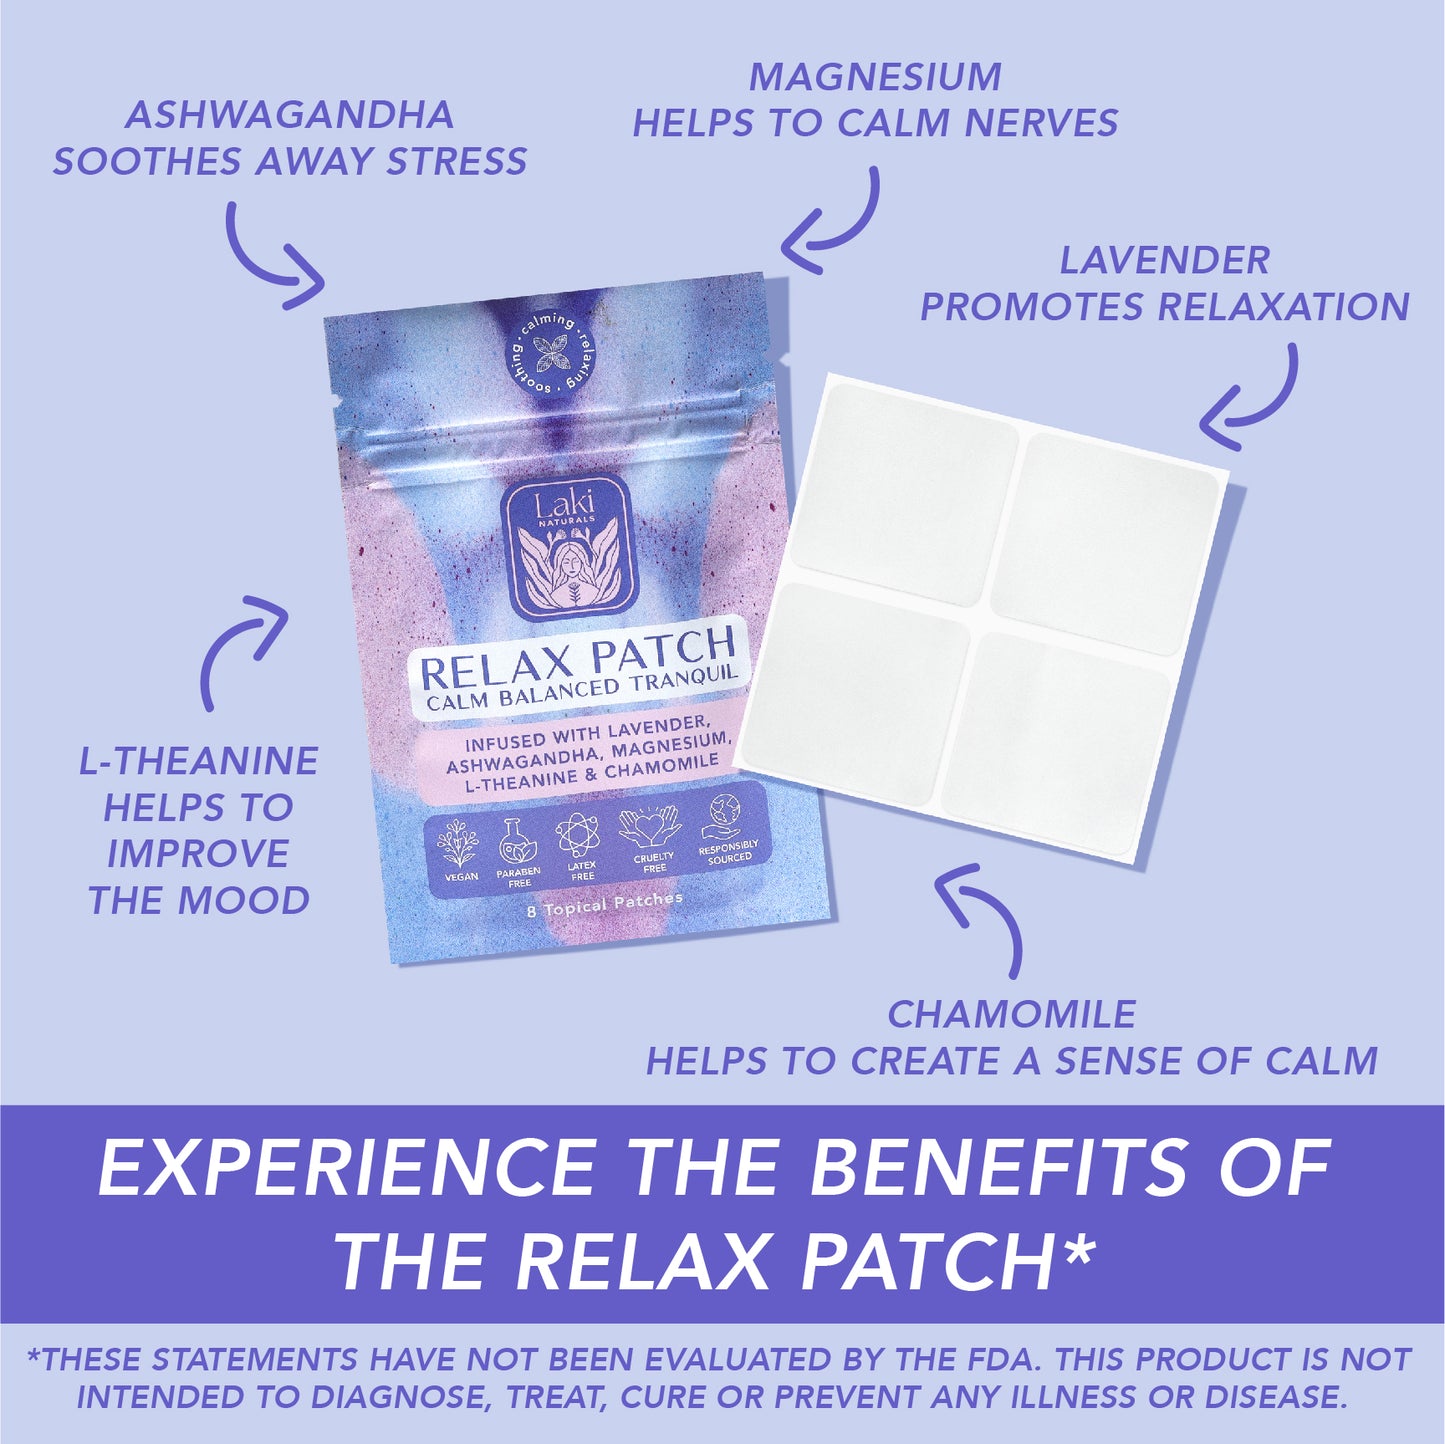 Relax Patch - Laki Naturals